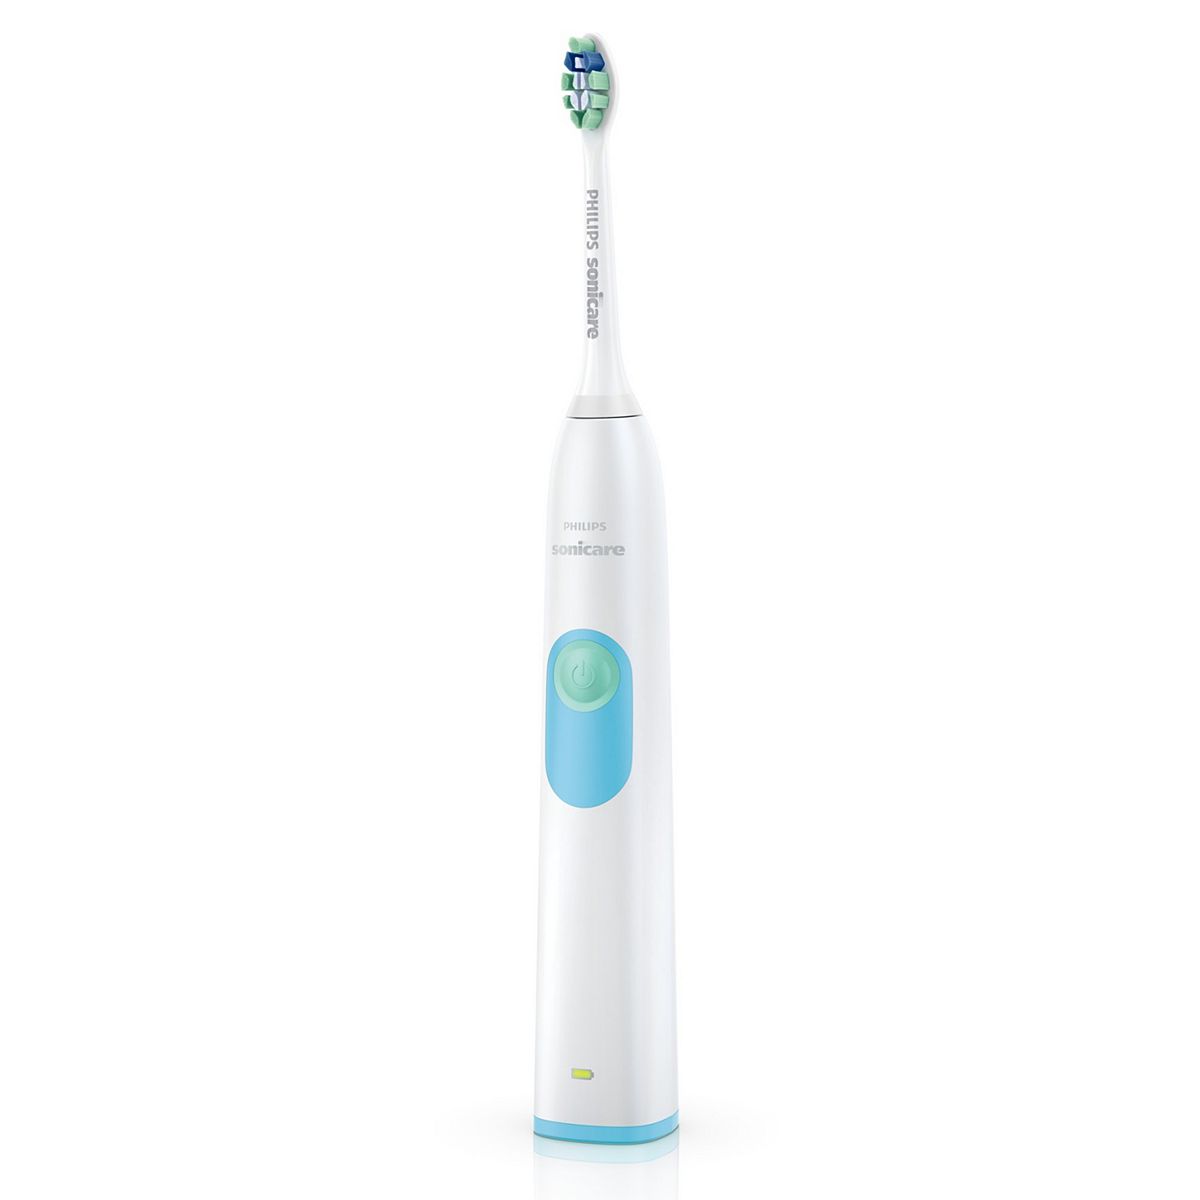 Philips Sonicare Series 2 Plaque Control Rechargeable Toothbrush $23.00